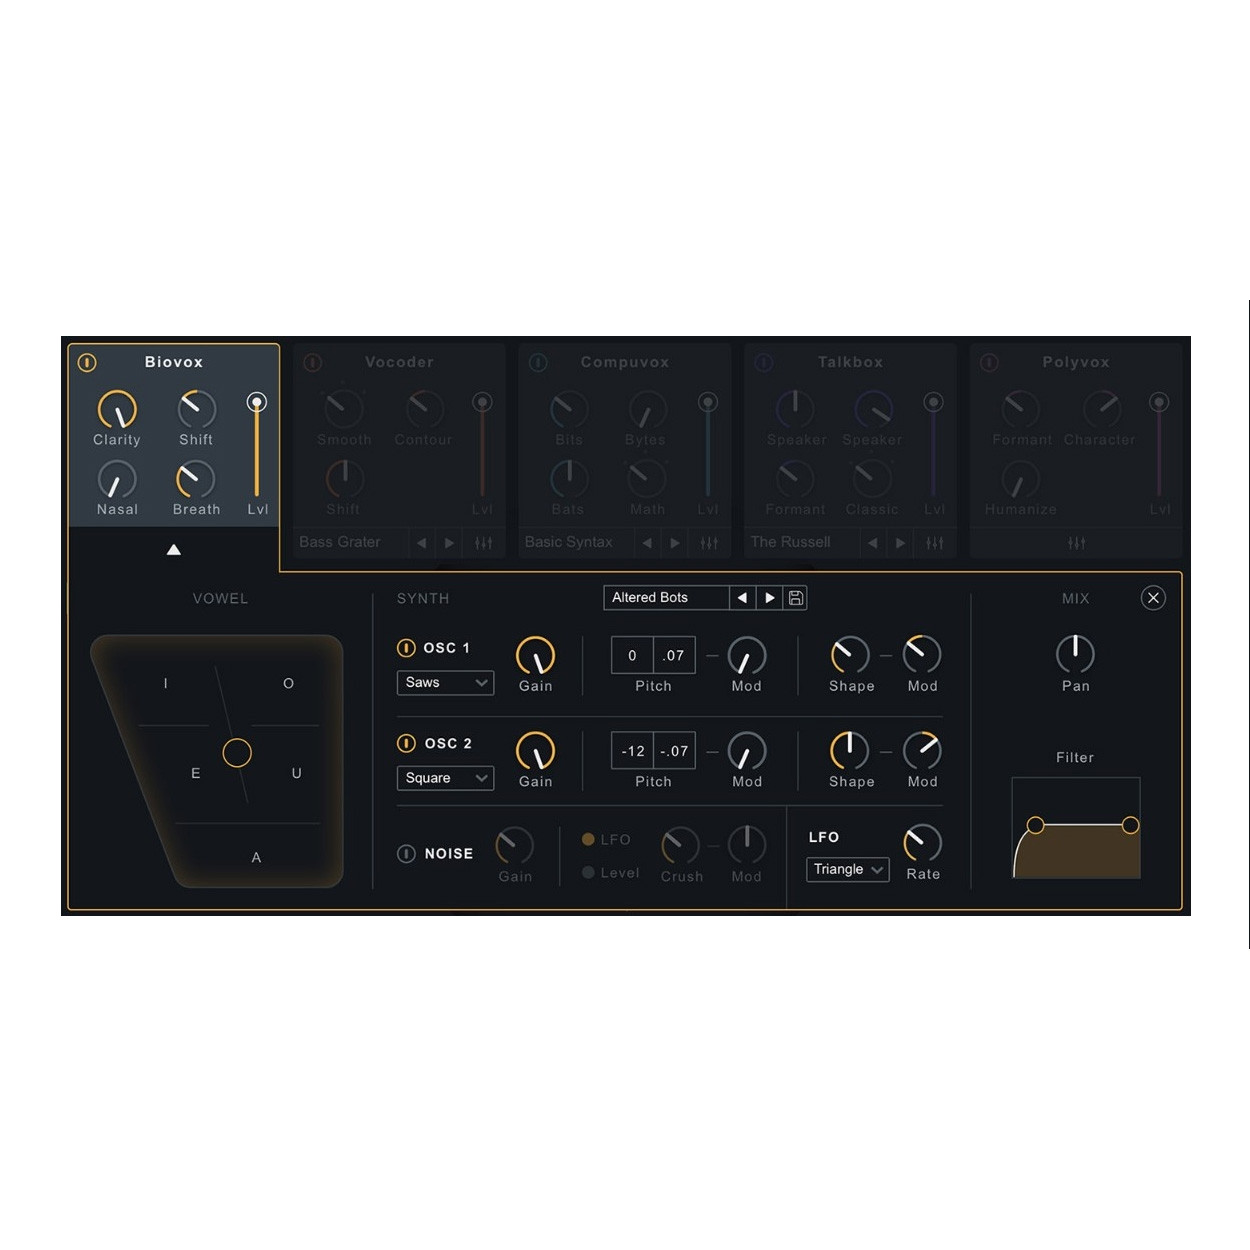 Izotope vocal synth vst download full